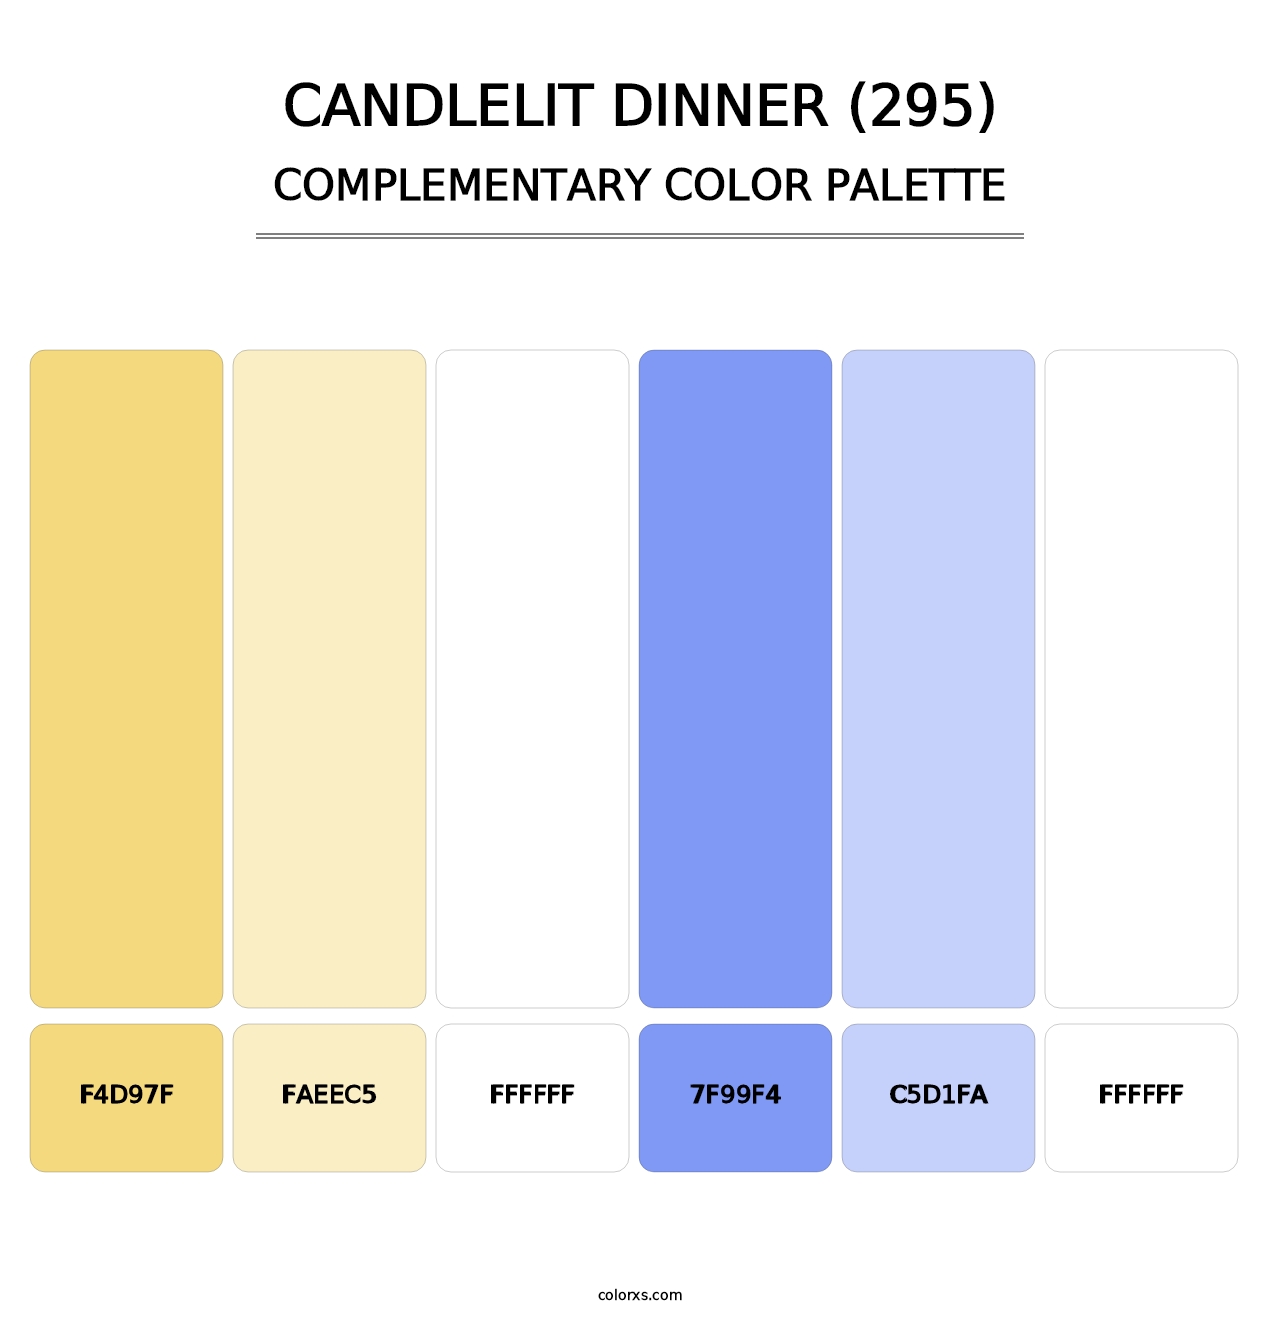 Candlelit Dinner (295) - Complementary Color Palette